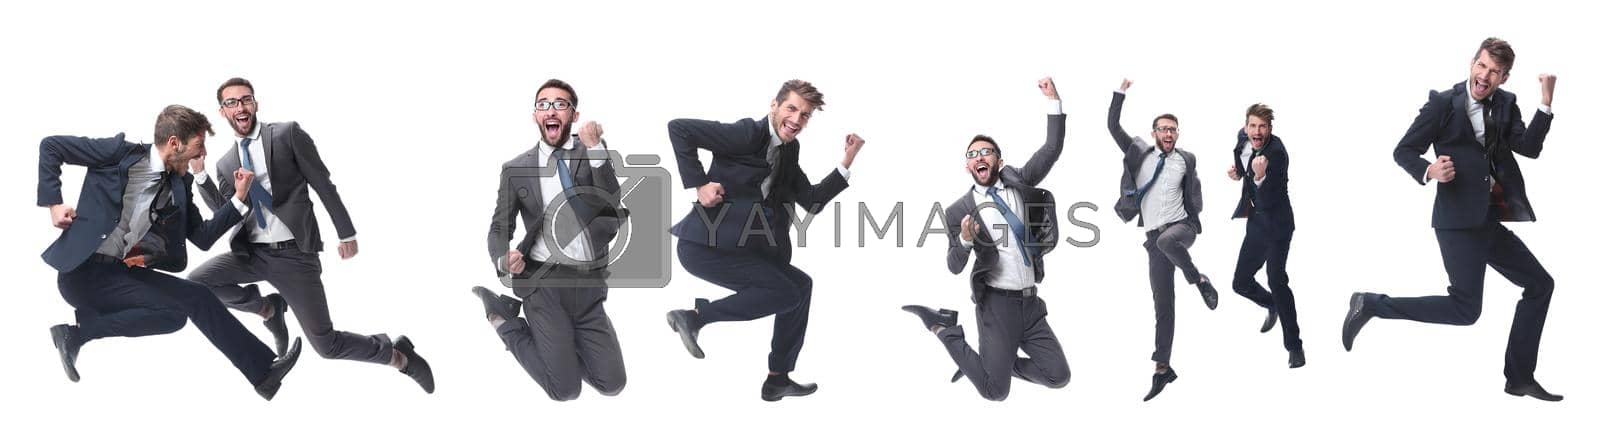 Royalty free image of in full growth. two cheerful dancing business people by asdf